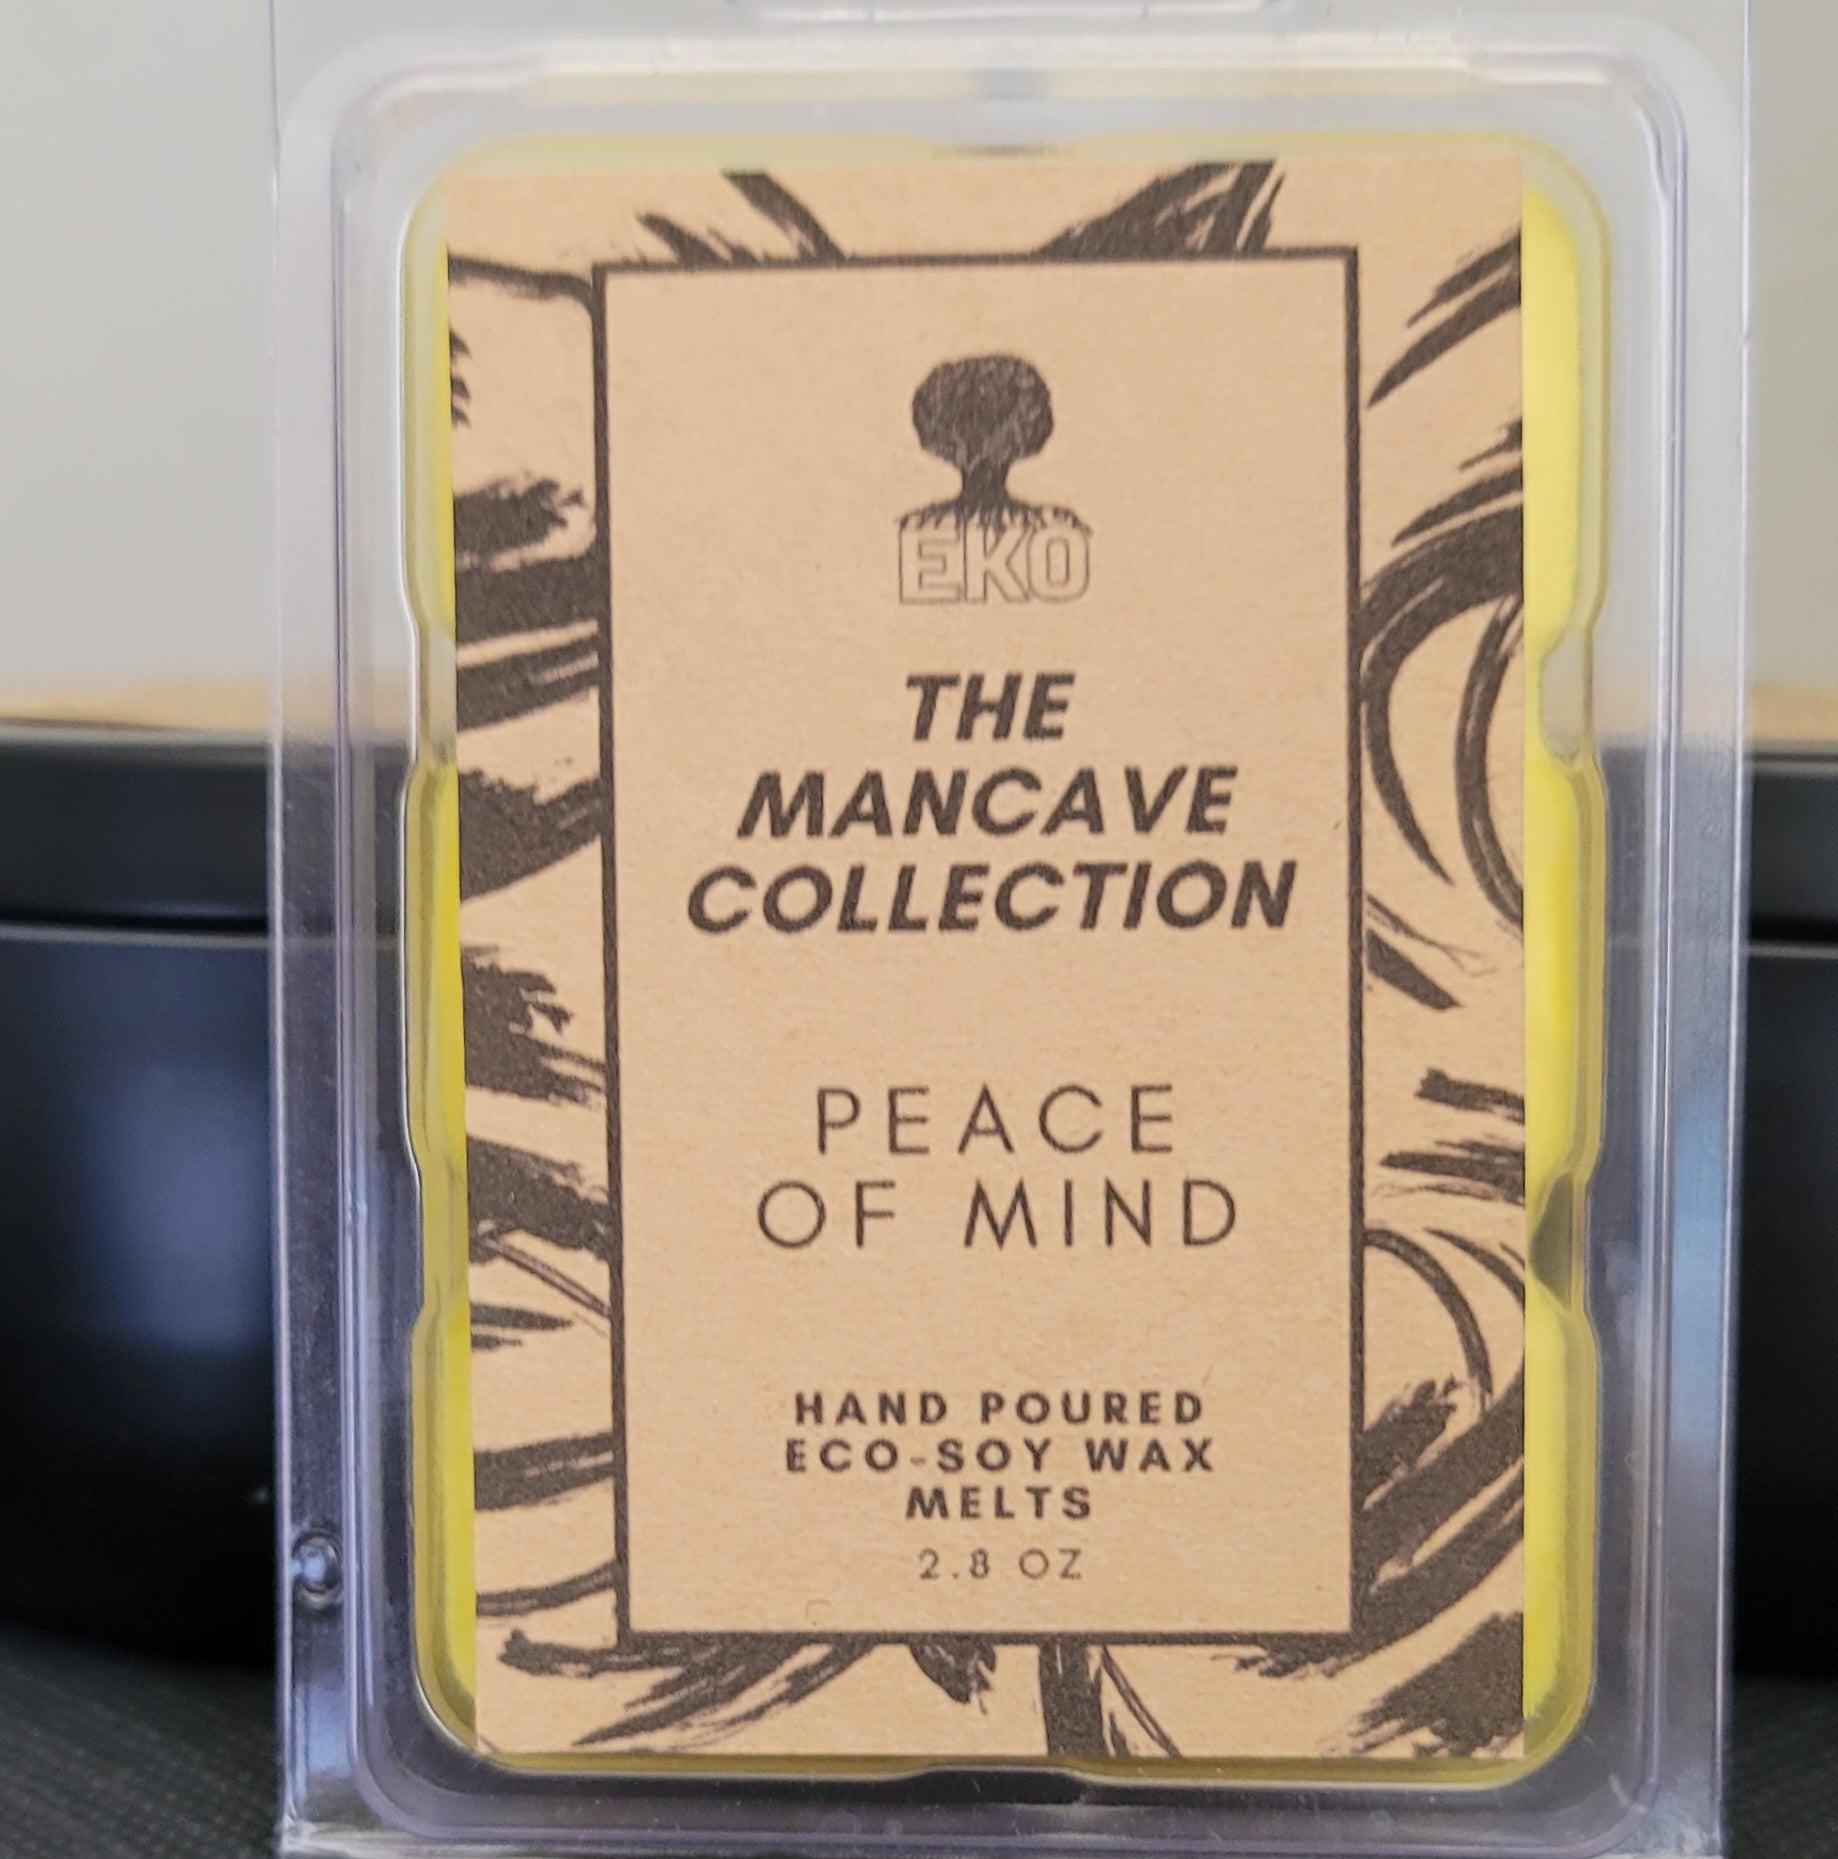 The Mancave Wax Melts Collection